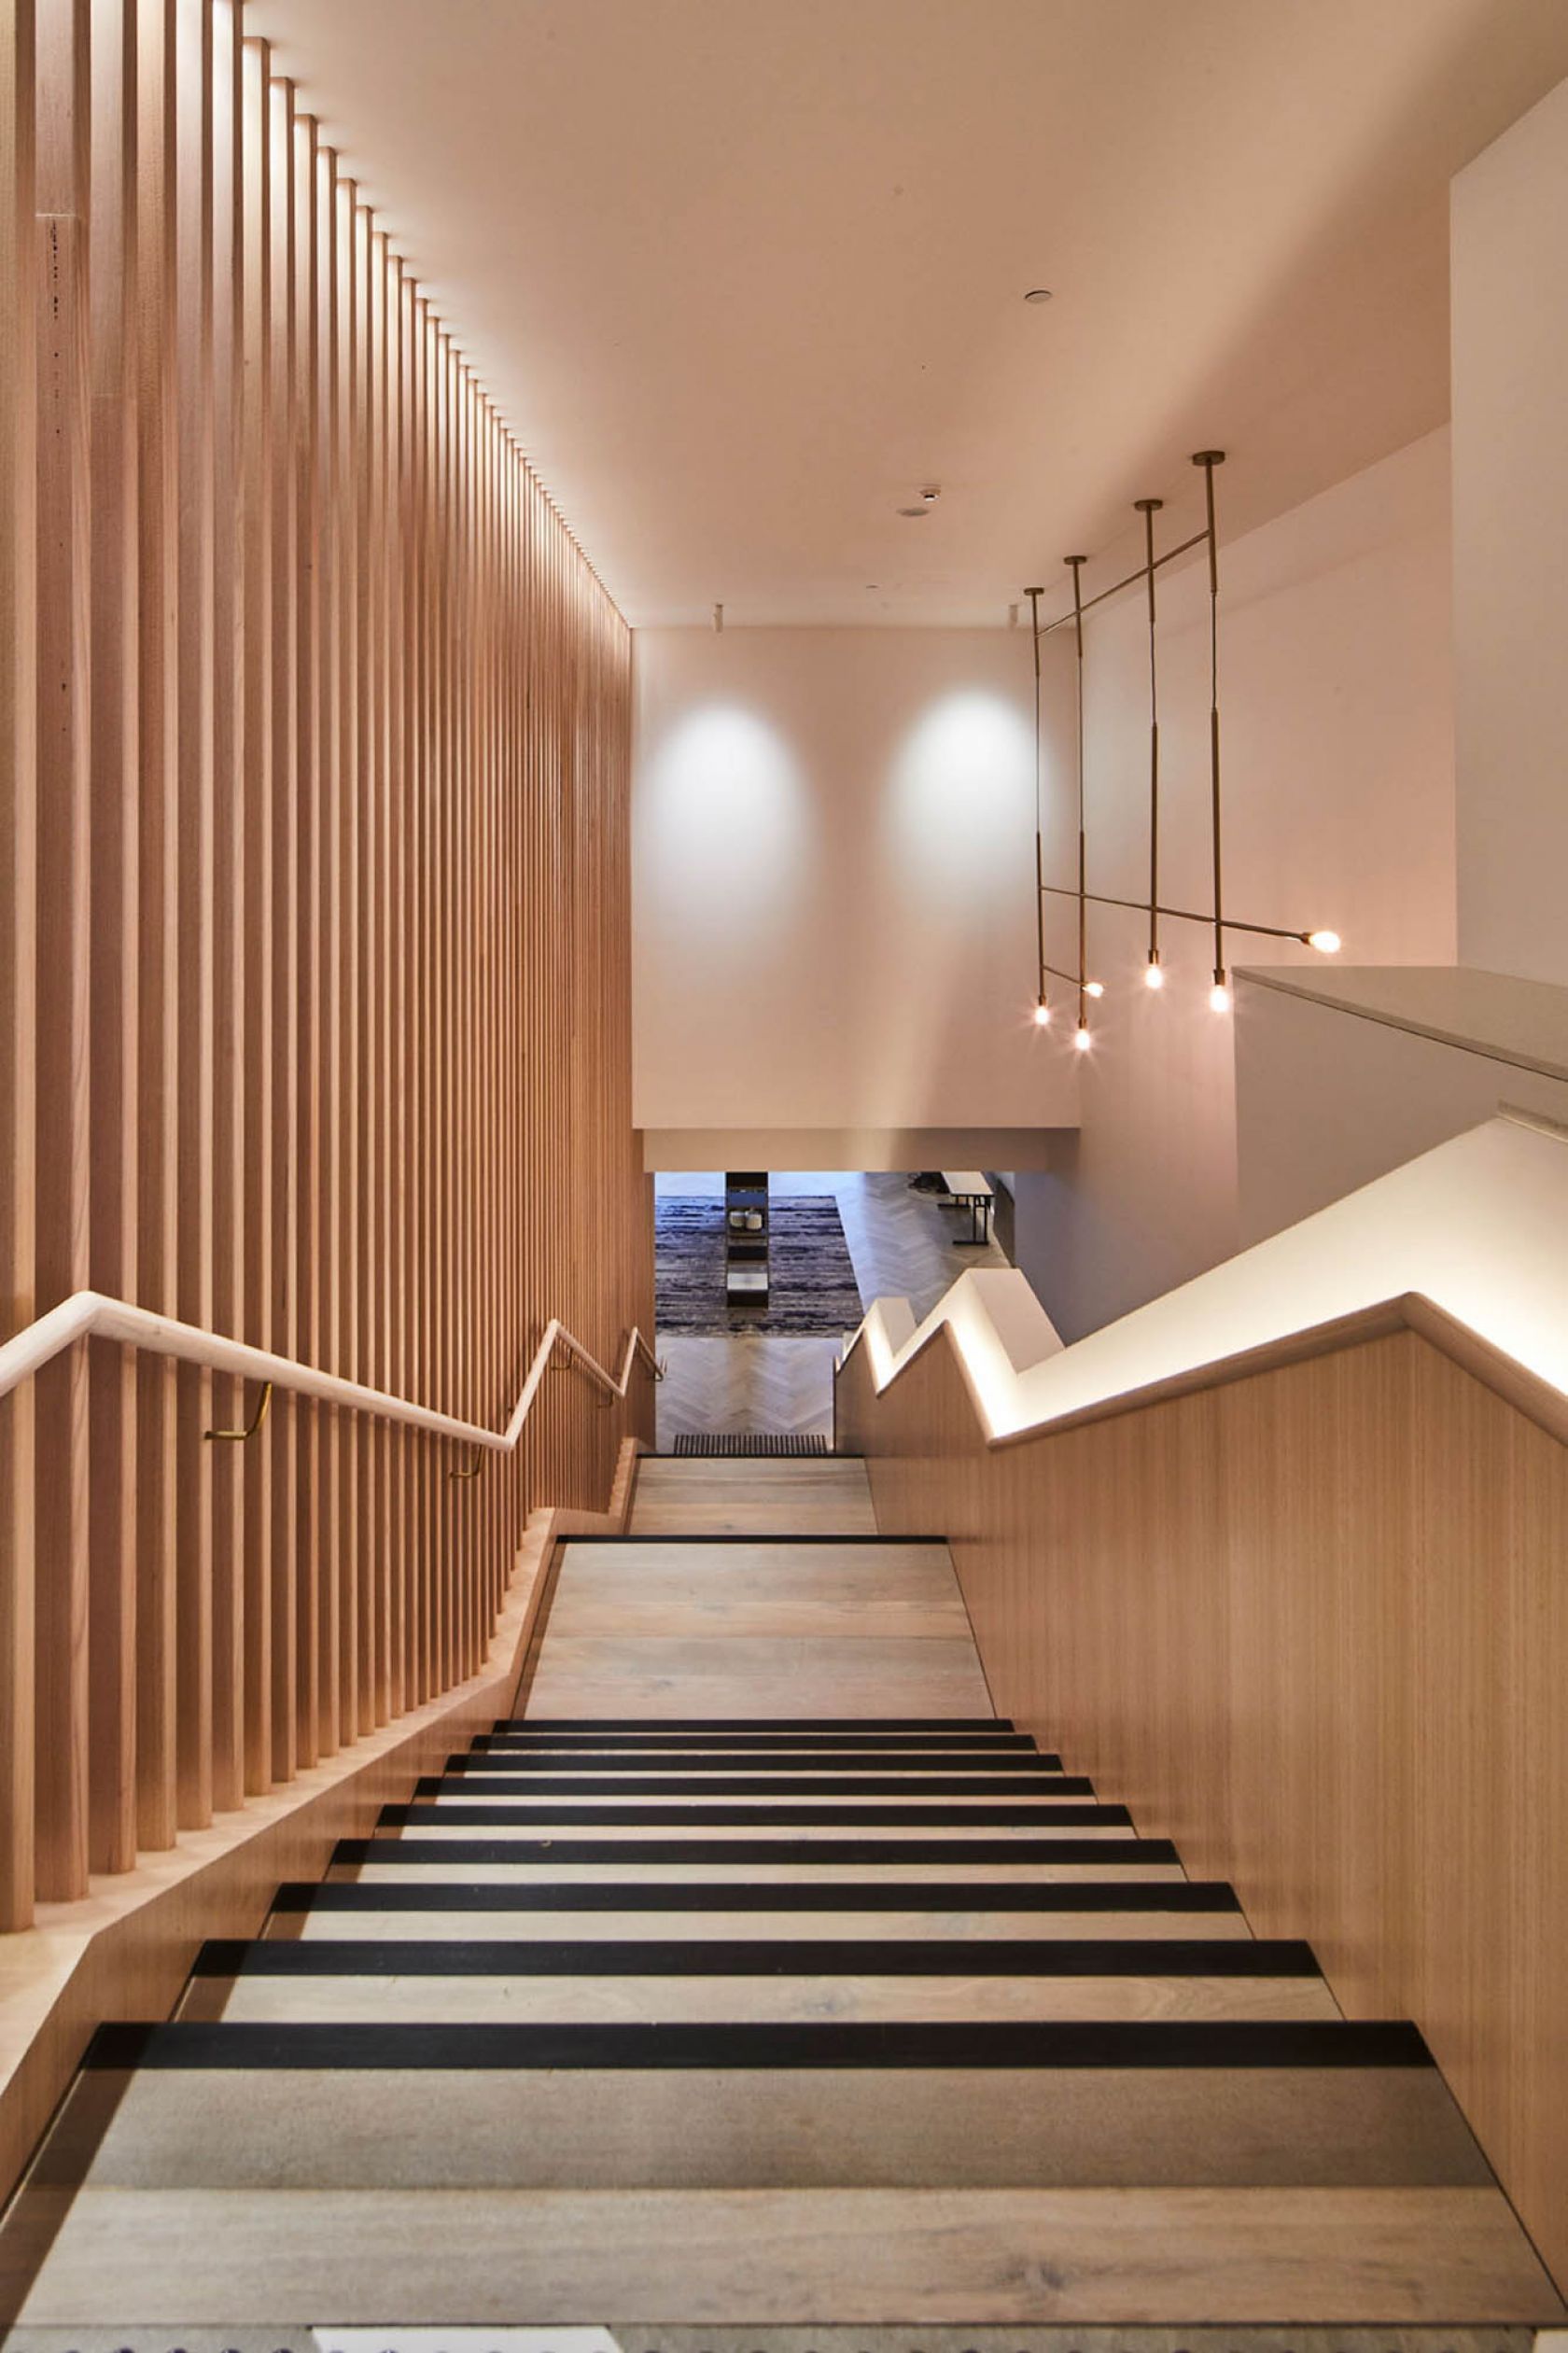 Crowne Plaza Coogee Beach hotel hospitality tourism sydney construction fitout stairs feature timber banister